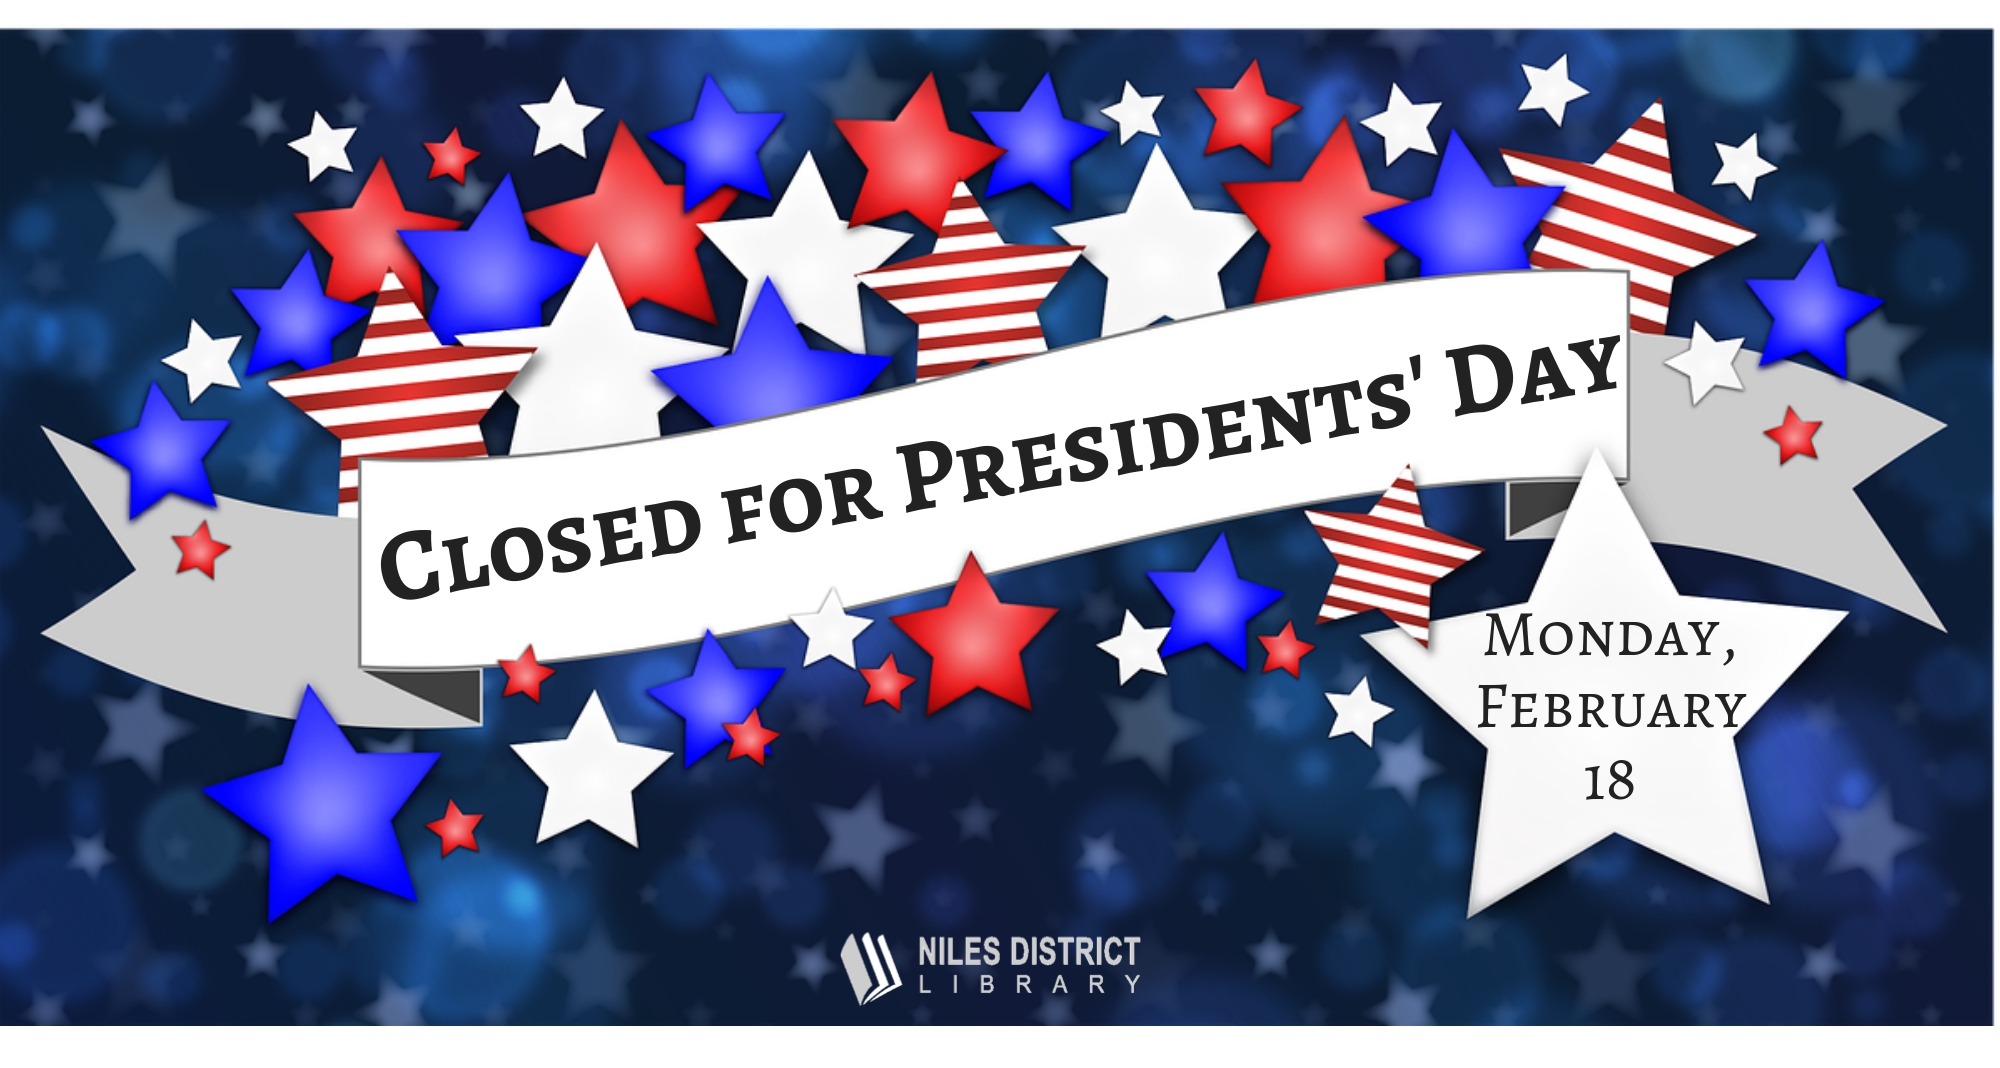 Closed for Presidents’ Day upd